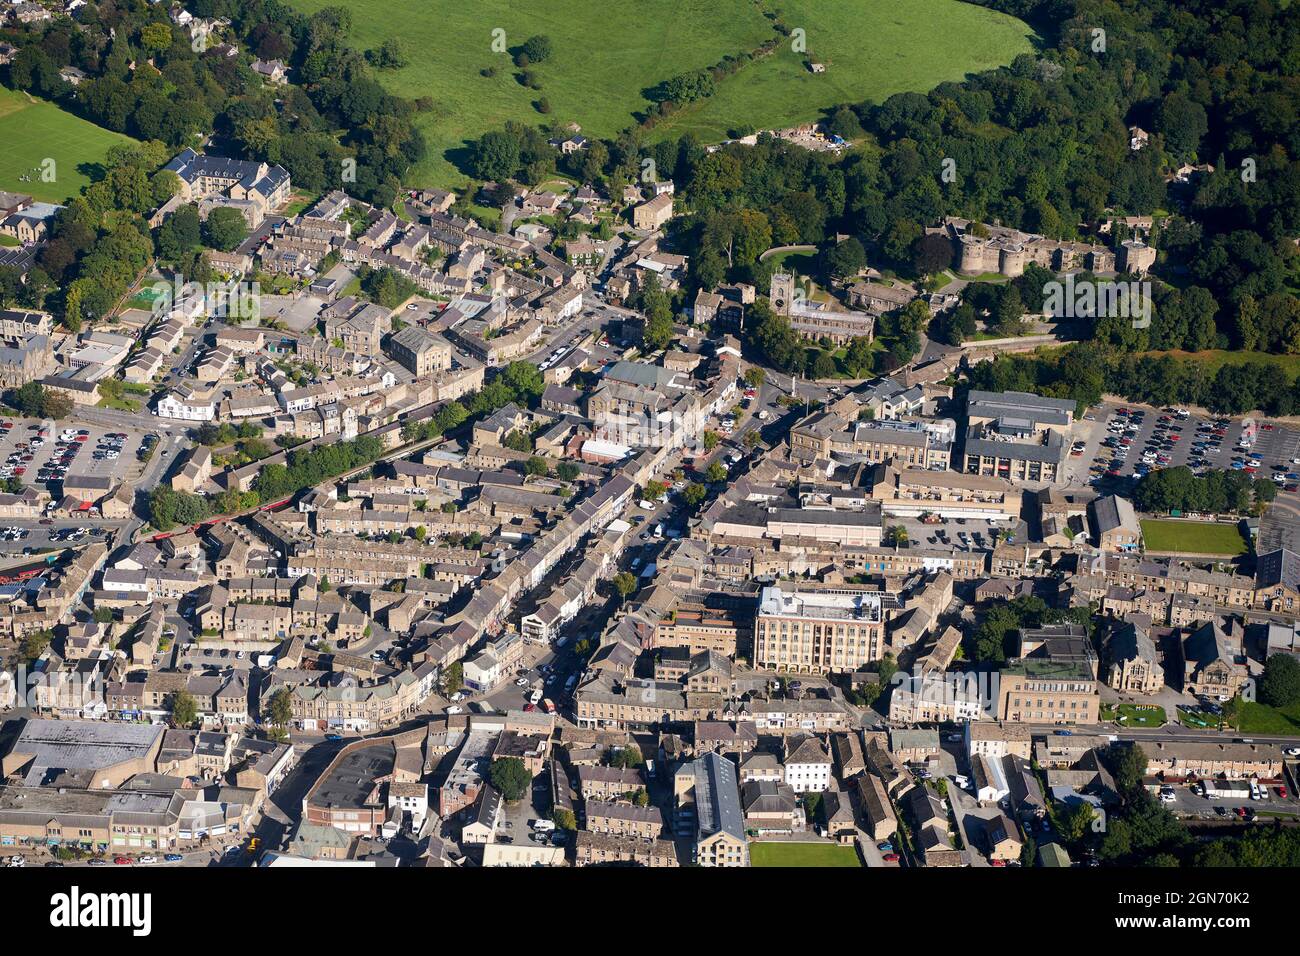 An aerial view of the market town and regional centre, of Skipton, North Yorkshire, Northern England, UK showing the high street and town centre Stock Photo